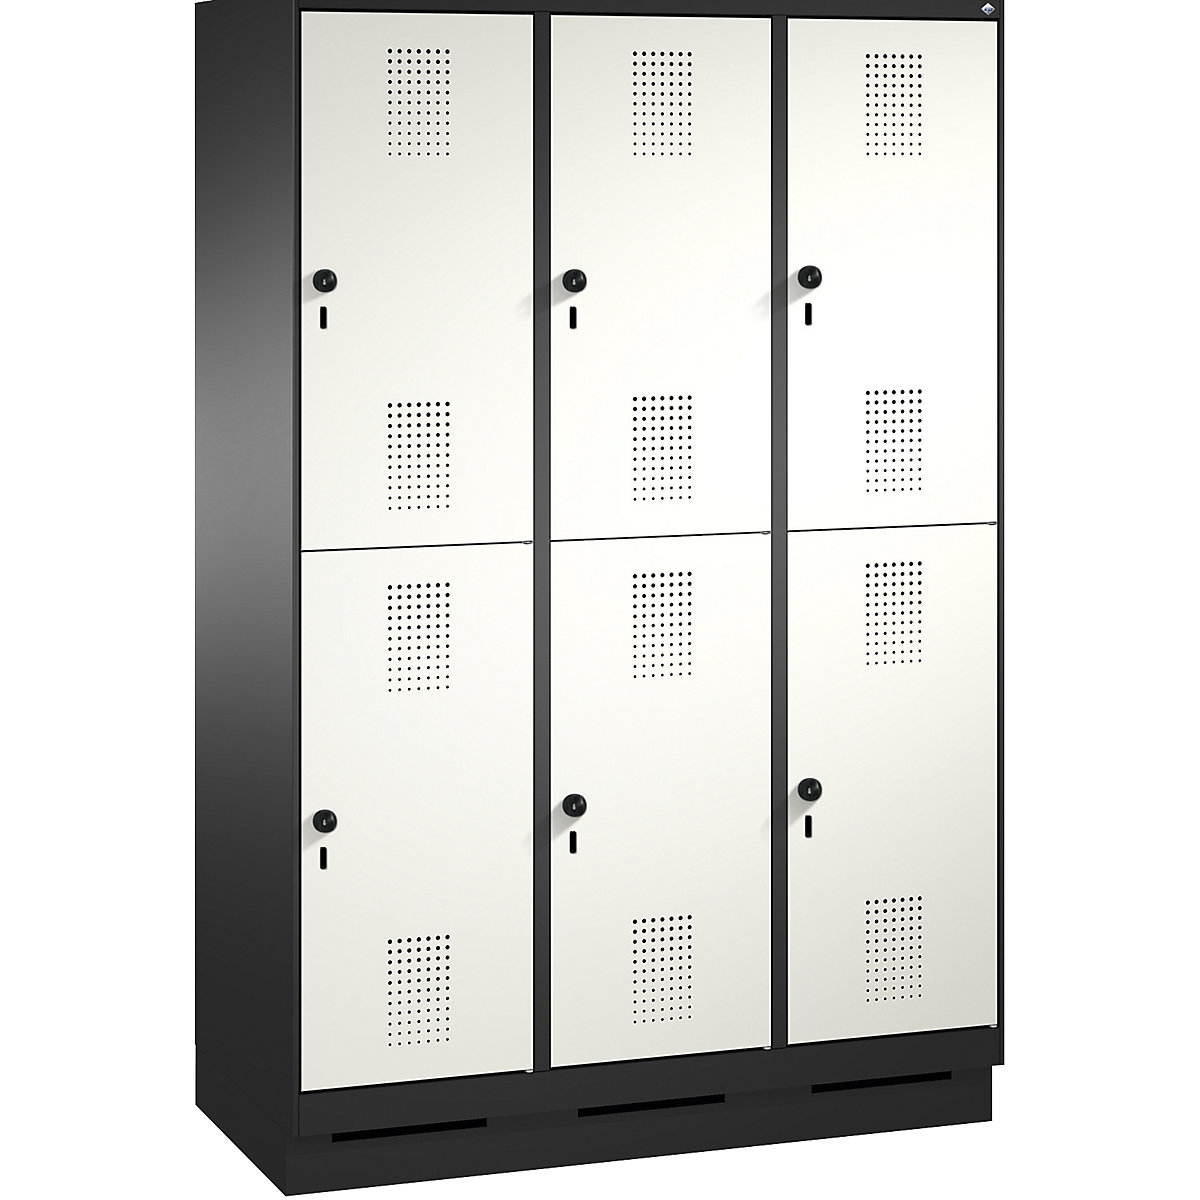 EVOLO cloakroom locker, double tier, with plinth – C+P, 3 compartments, 2 shelf compartments each, compartment width 400 mm, black grey / traffic white-8